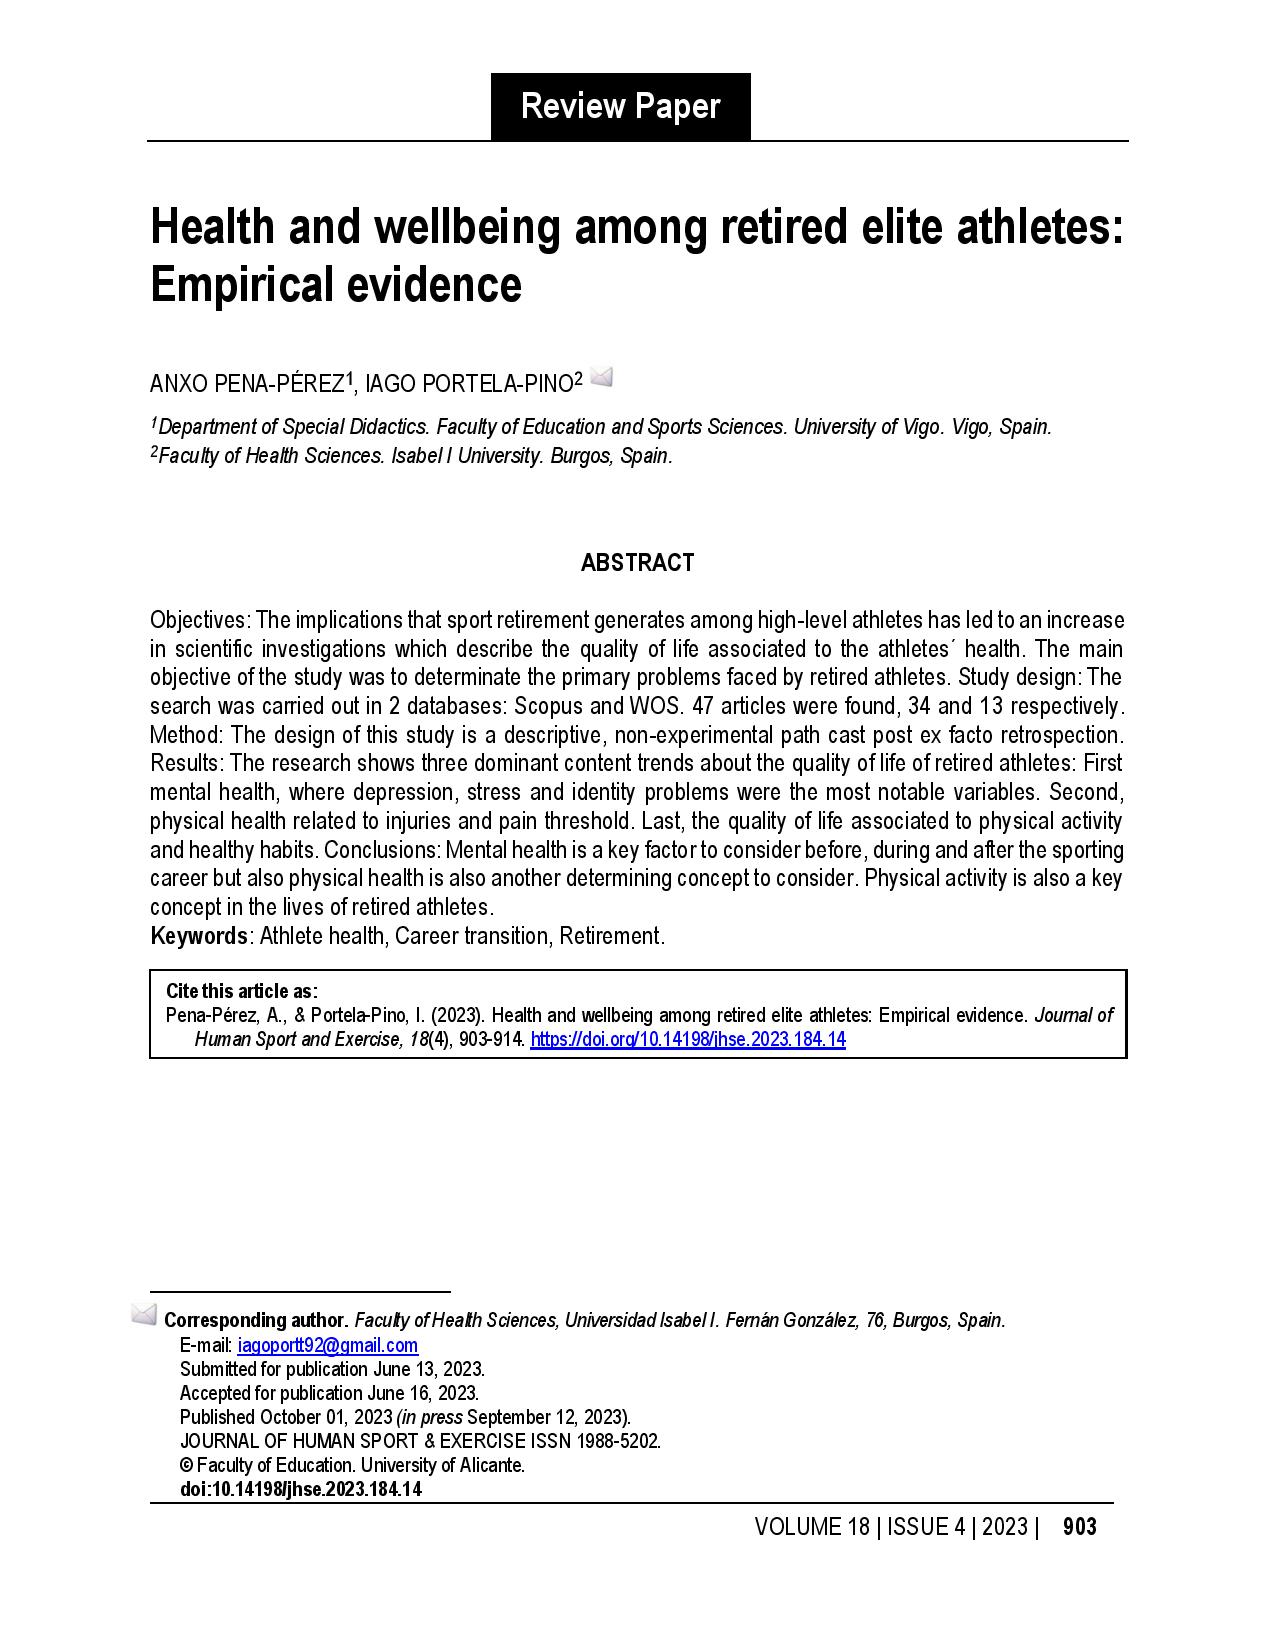 Health and wellbeing among retired elite athletes: Empirical evidence